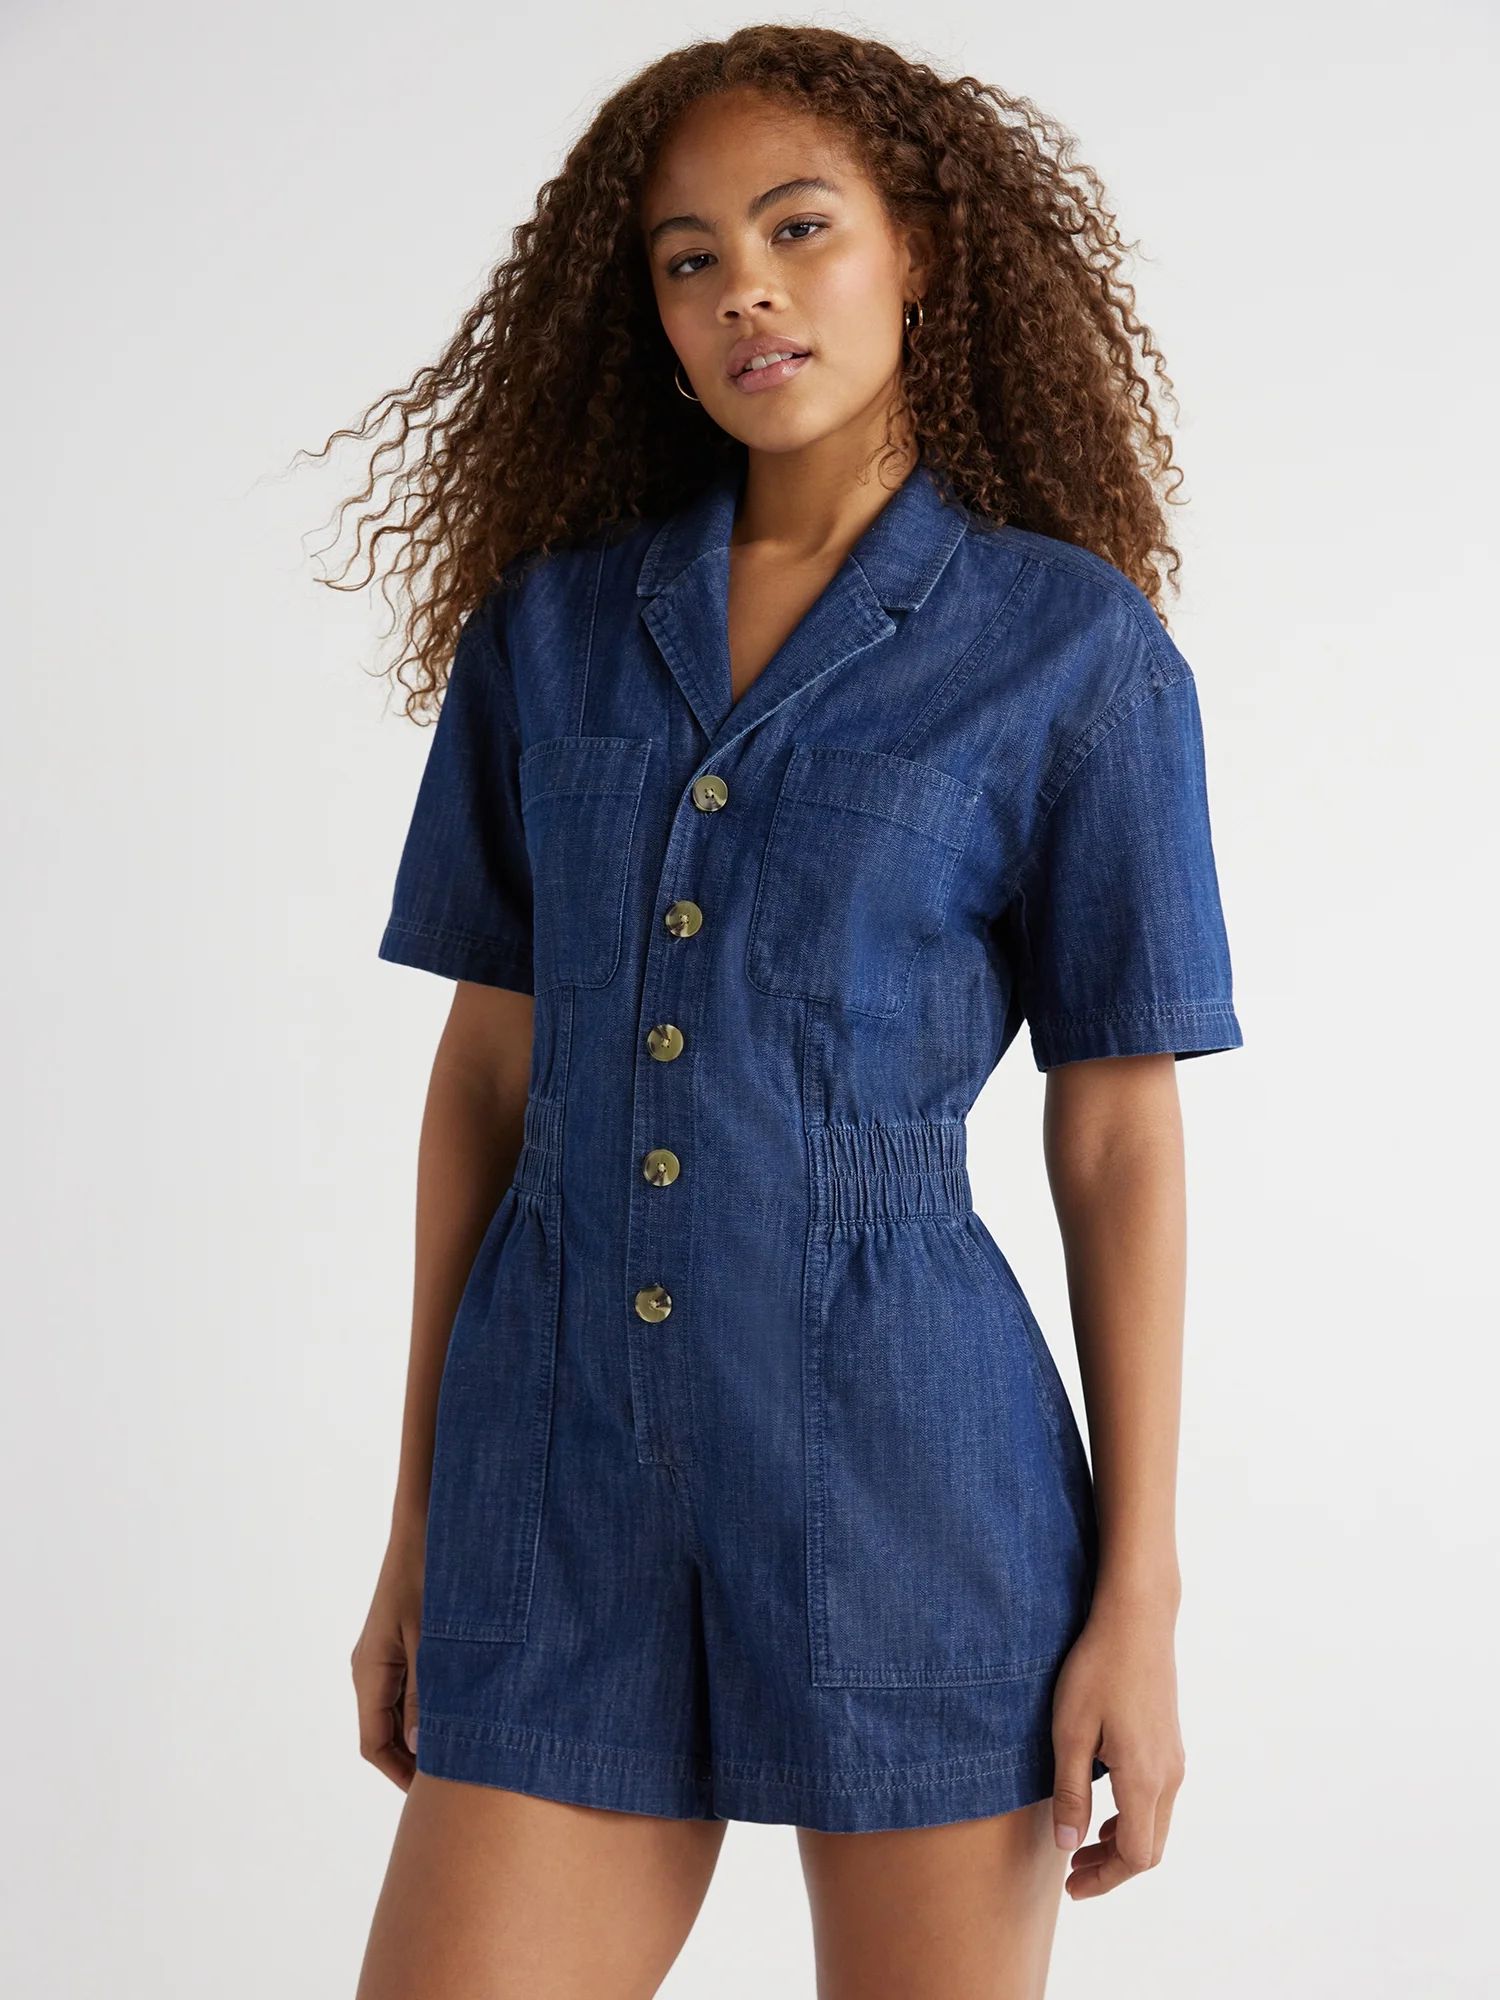 Free Assembly Women’s Utility Romper with Short Sleeves, 4.5” Inseam, Sizes XS-XXL | Walmart (US)